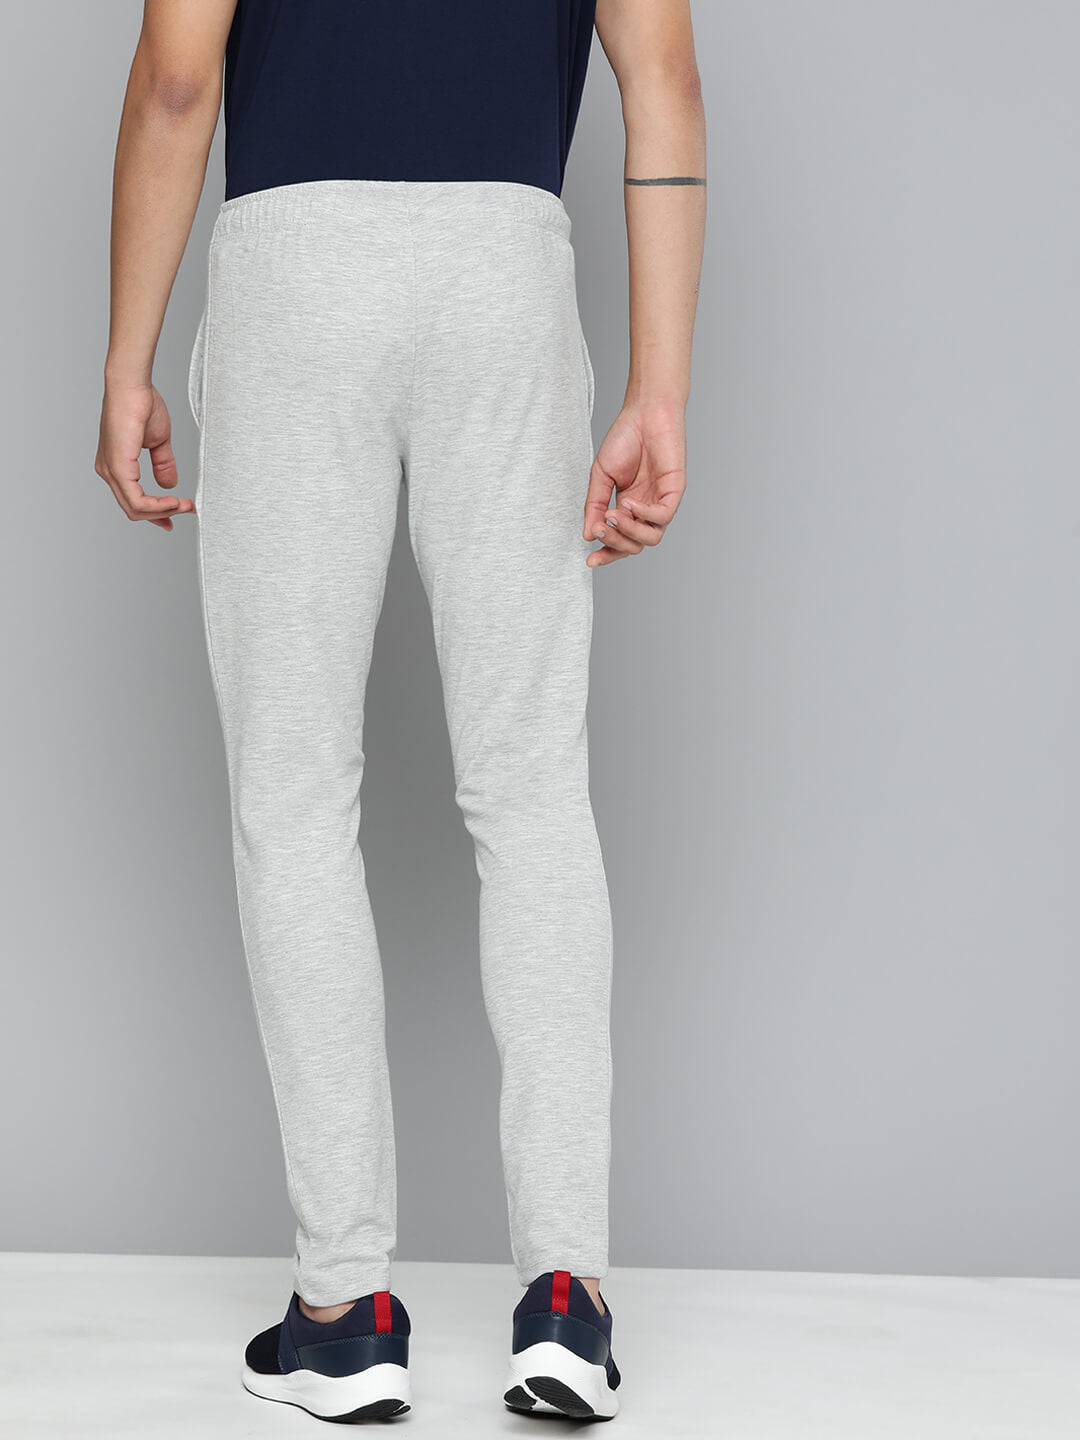 Plain Menss Slim Fit Track Pants at Rs 400/piece in Greater Noida | ID:  2850316856455